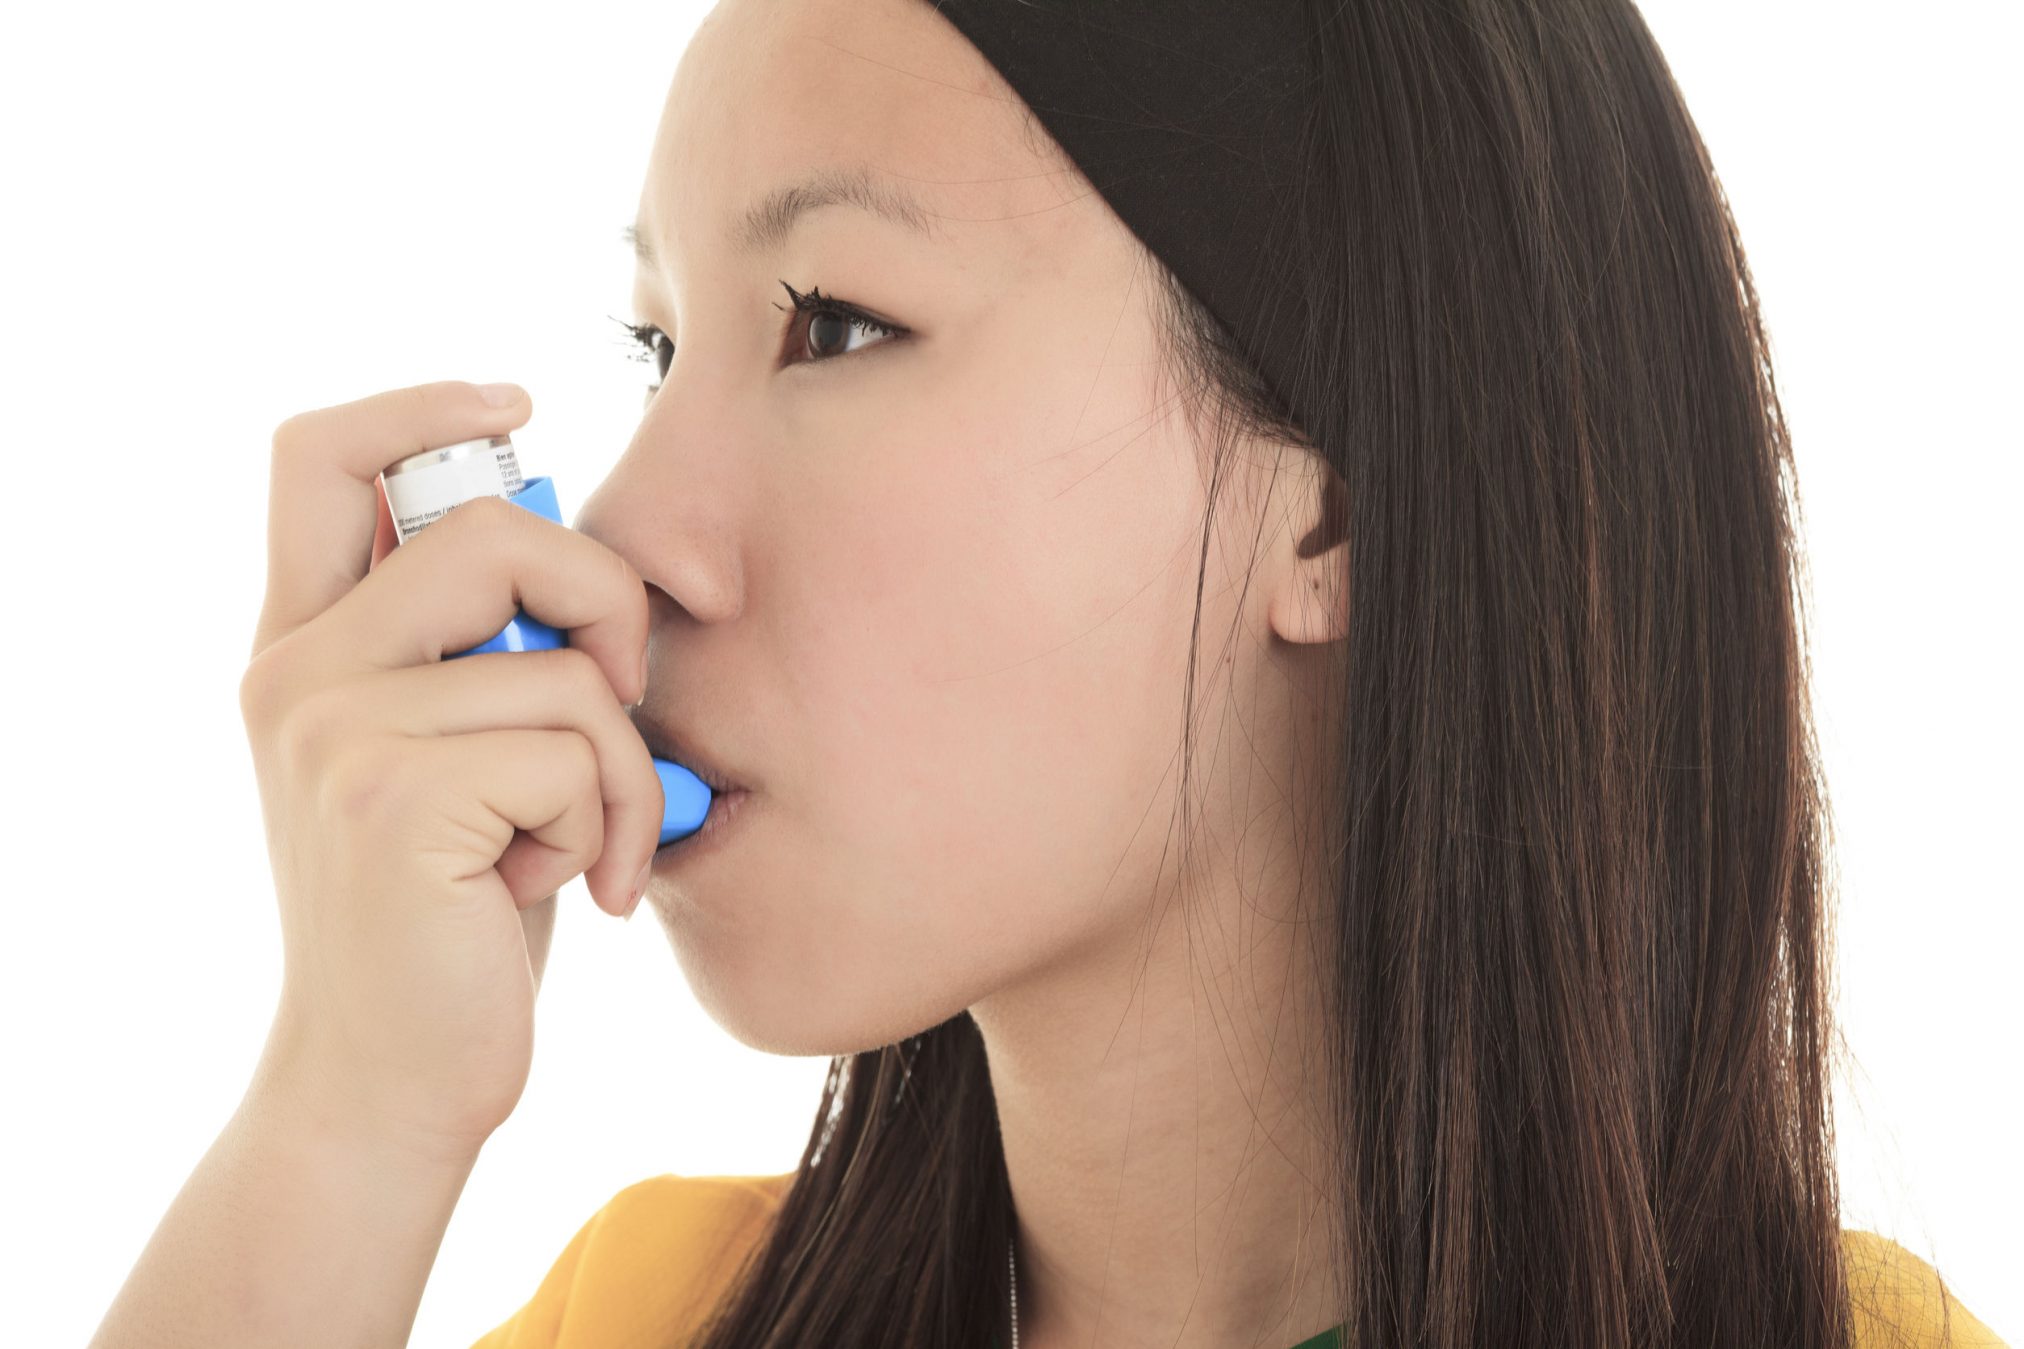 a close up image of a young woman using inhaler.